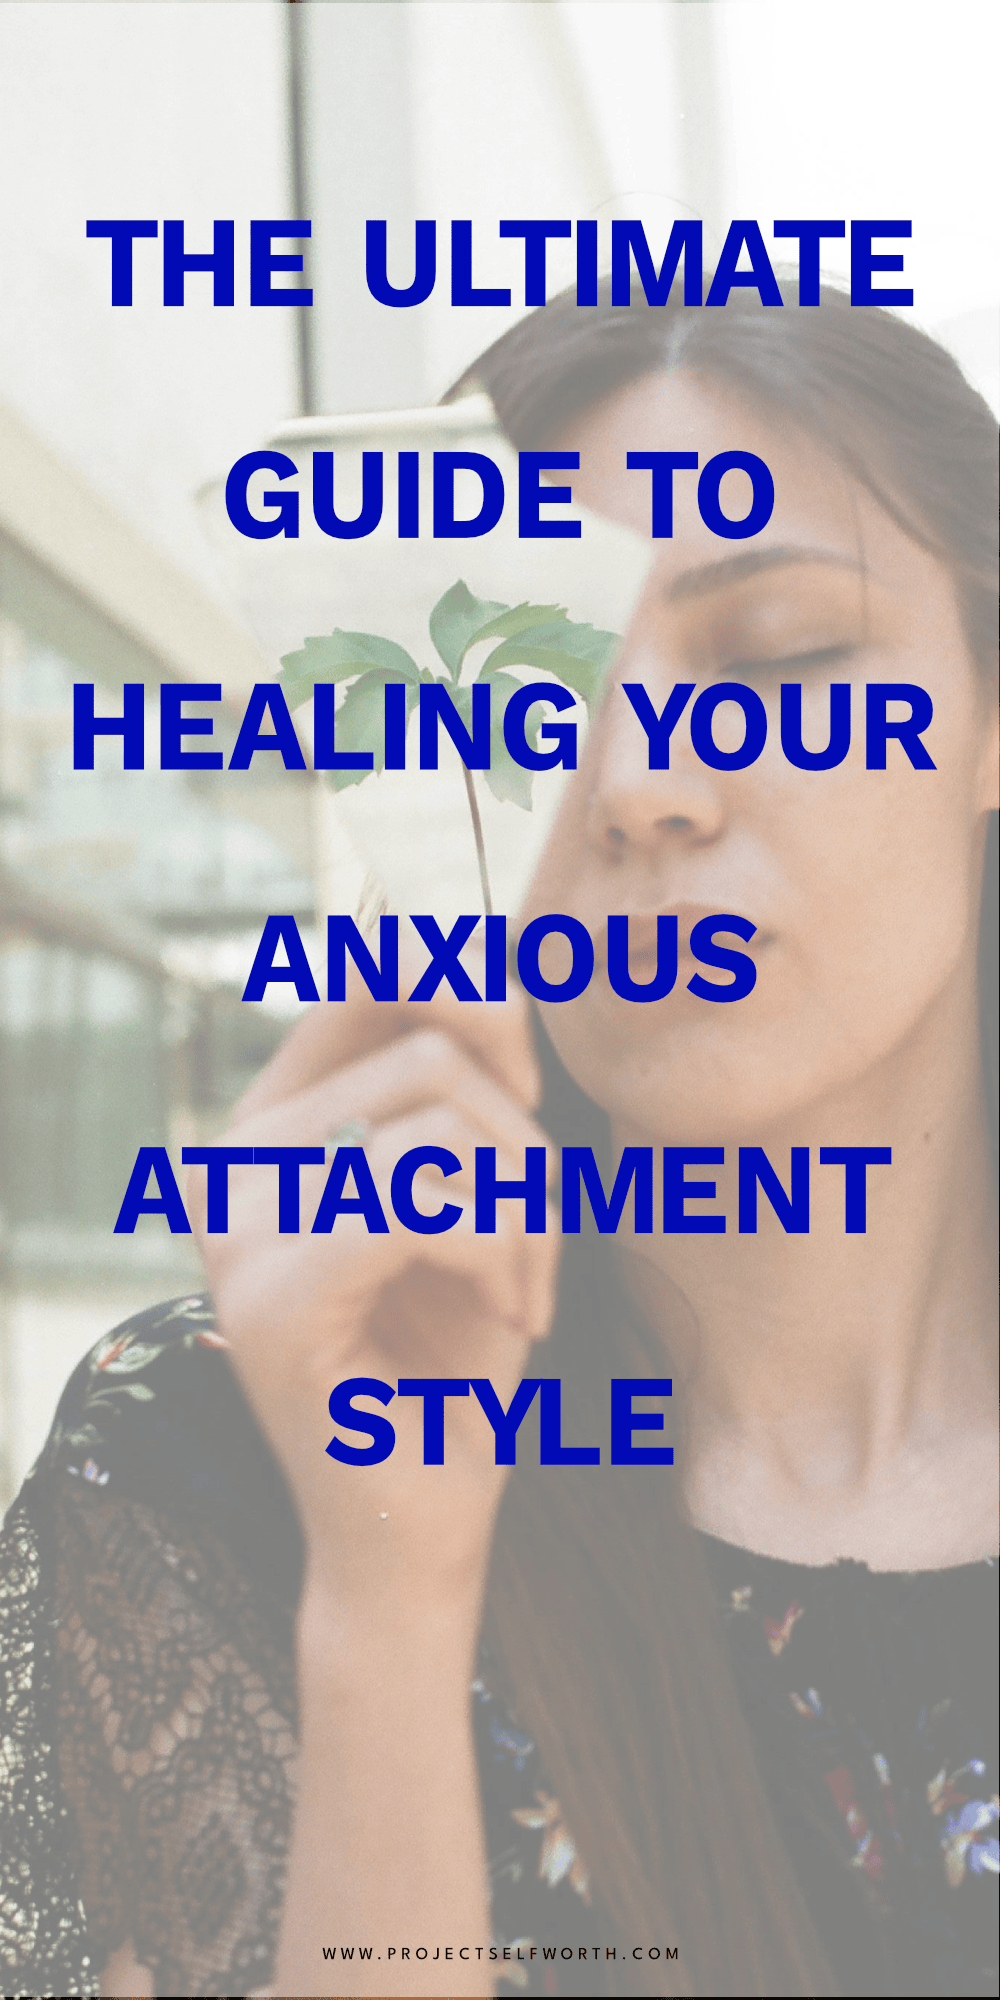 The Ultimate Guide To Healing Your Anxious Attachment Style